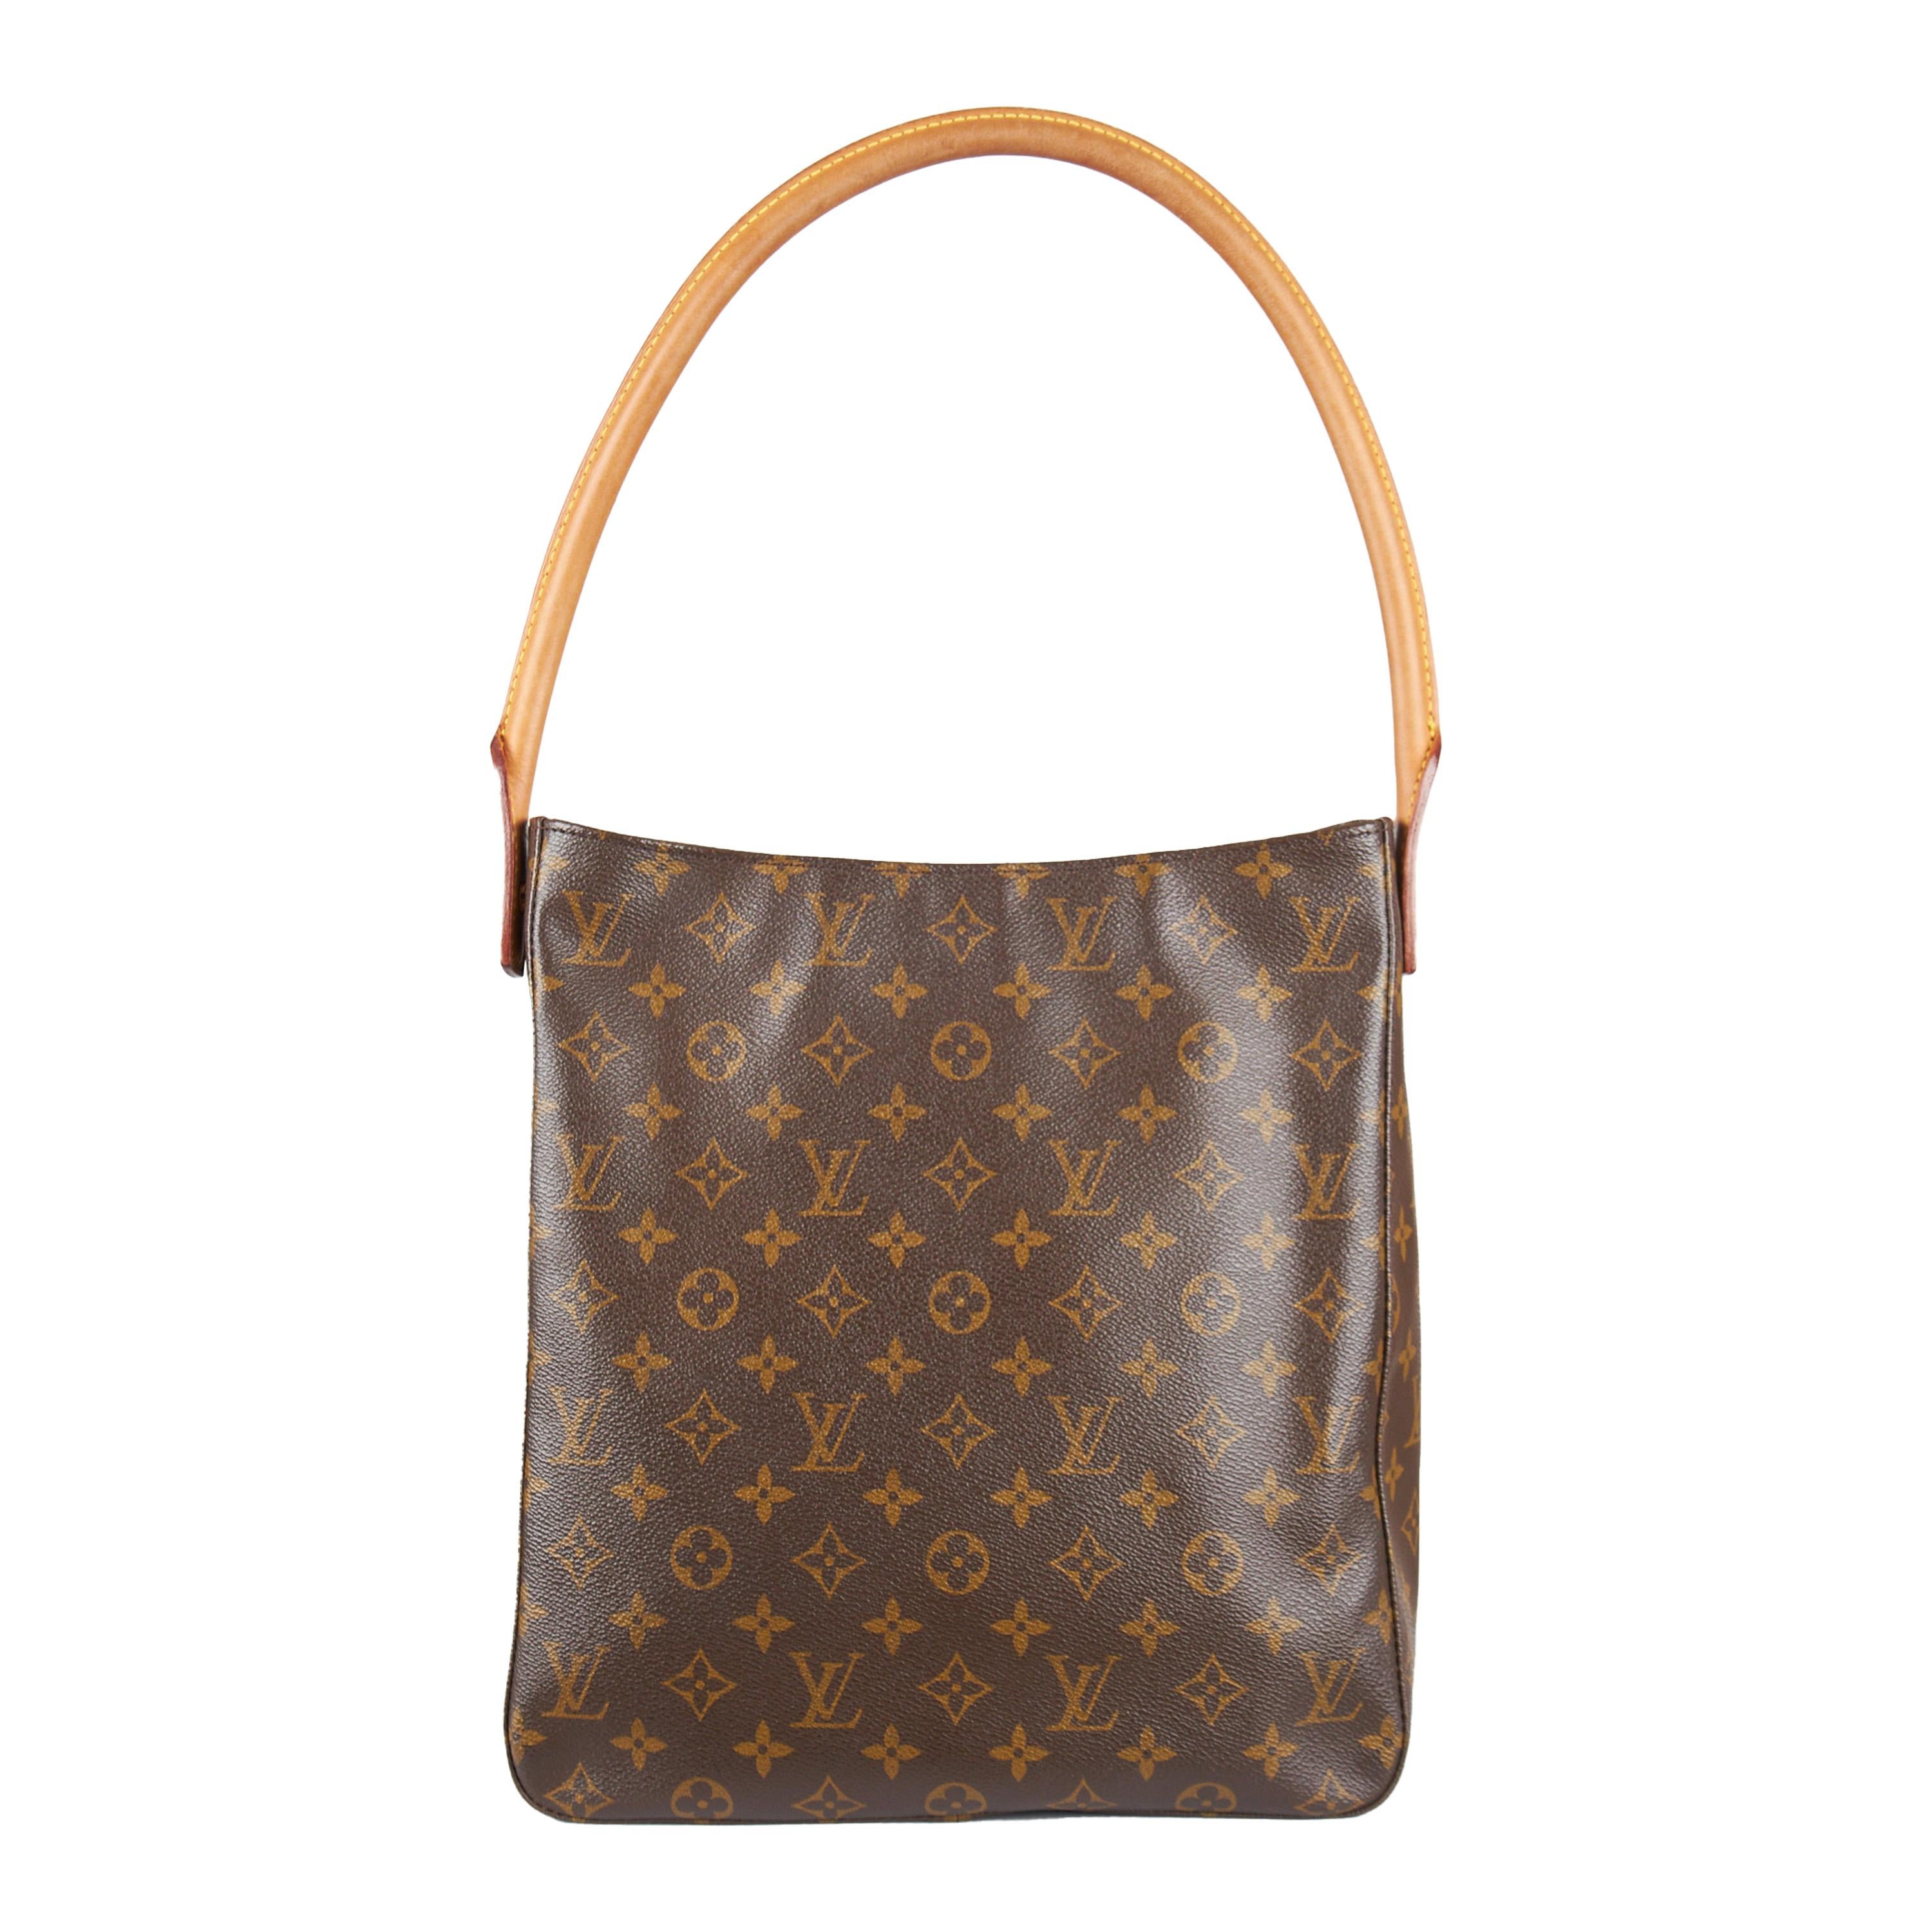 This Louis Vuitton Looping GM Monogram Shoulder Bag coated canvas from the 2000s, features a classic top handle, made of brown coated canvas with monogram print and gold tone hardware. The zip closure at the top ensures reliable security while the